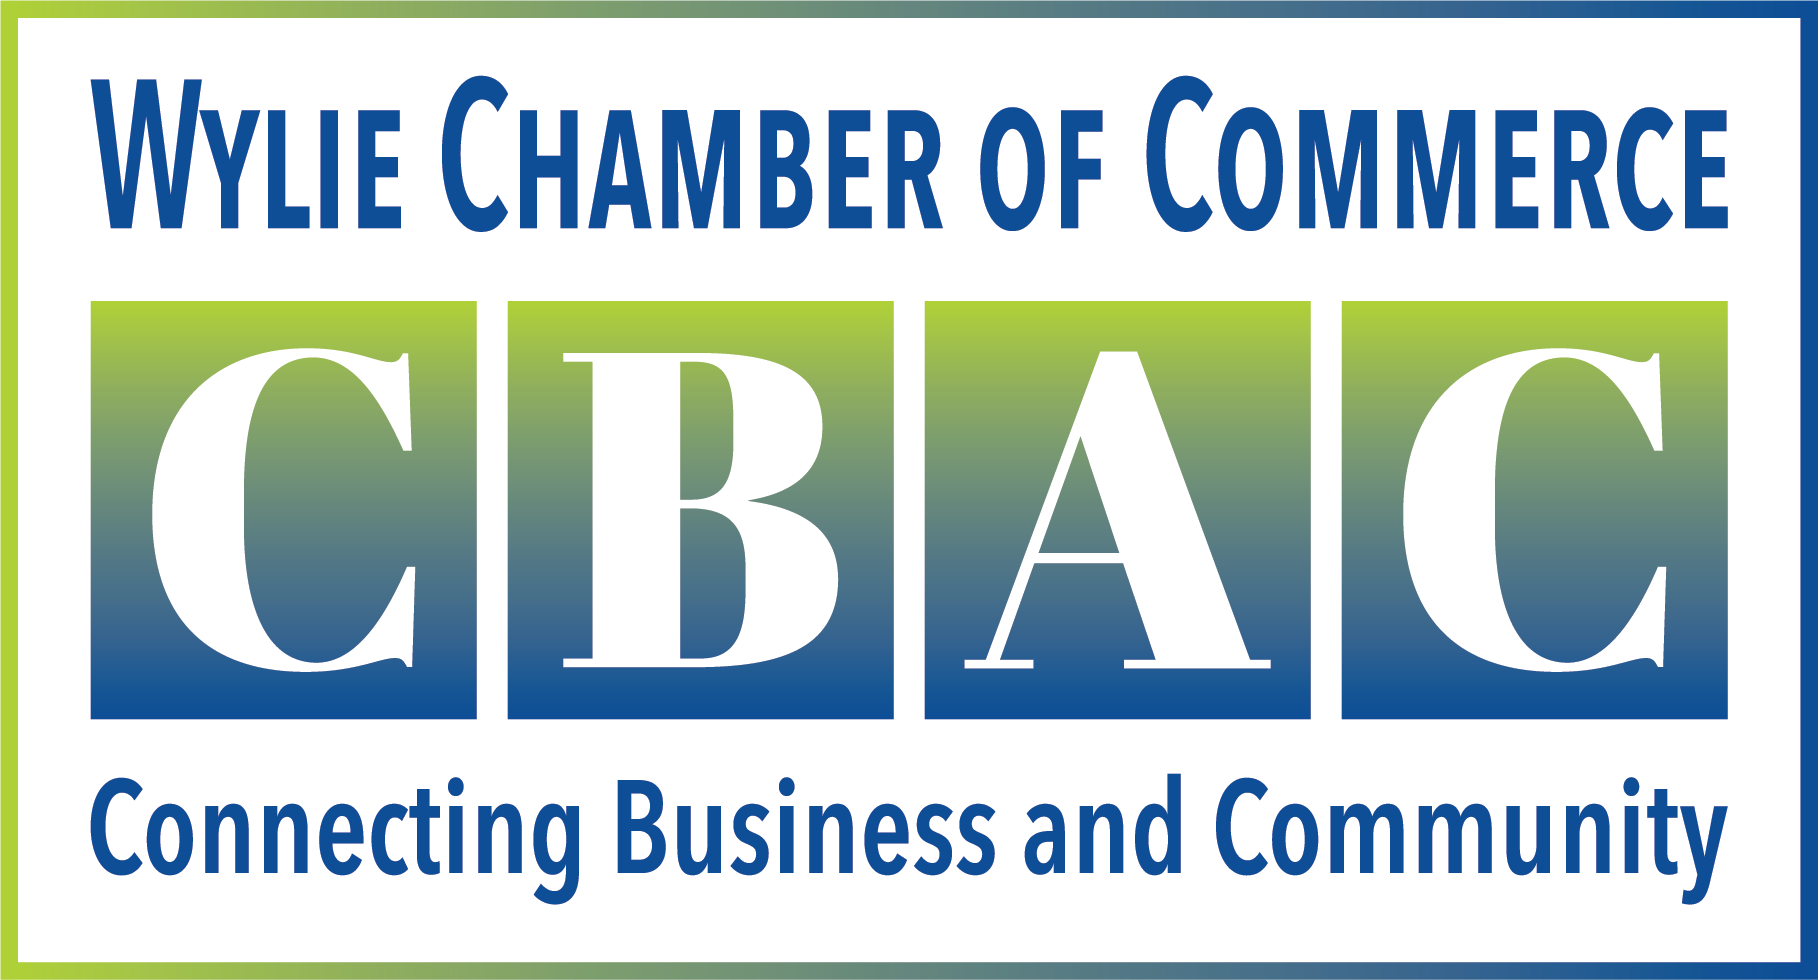 Wylie Chamber of Commerce Logo